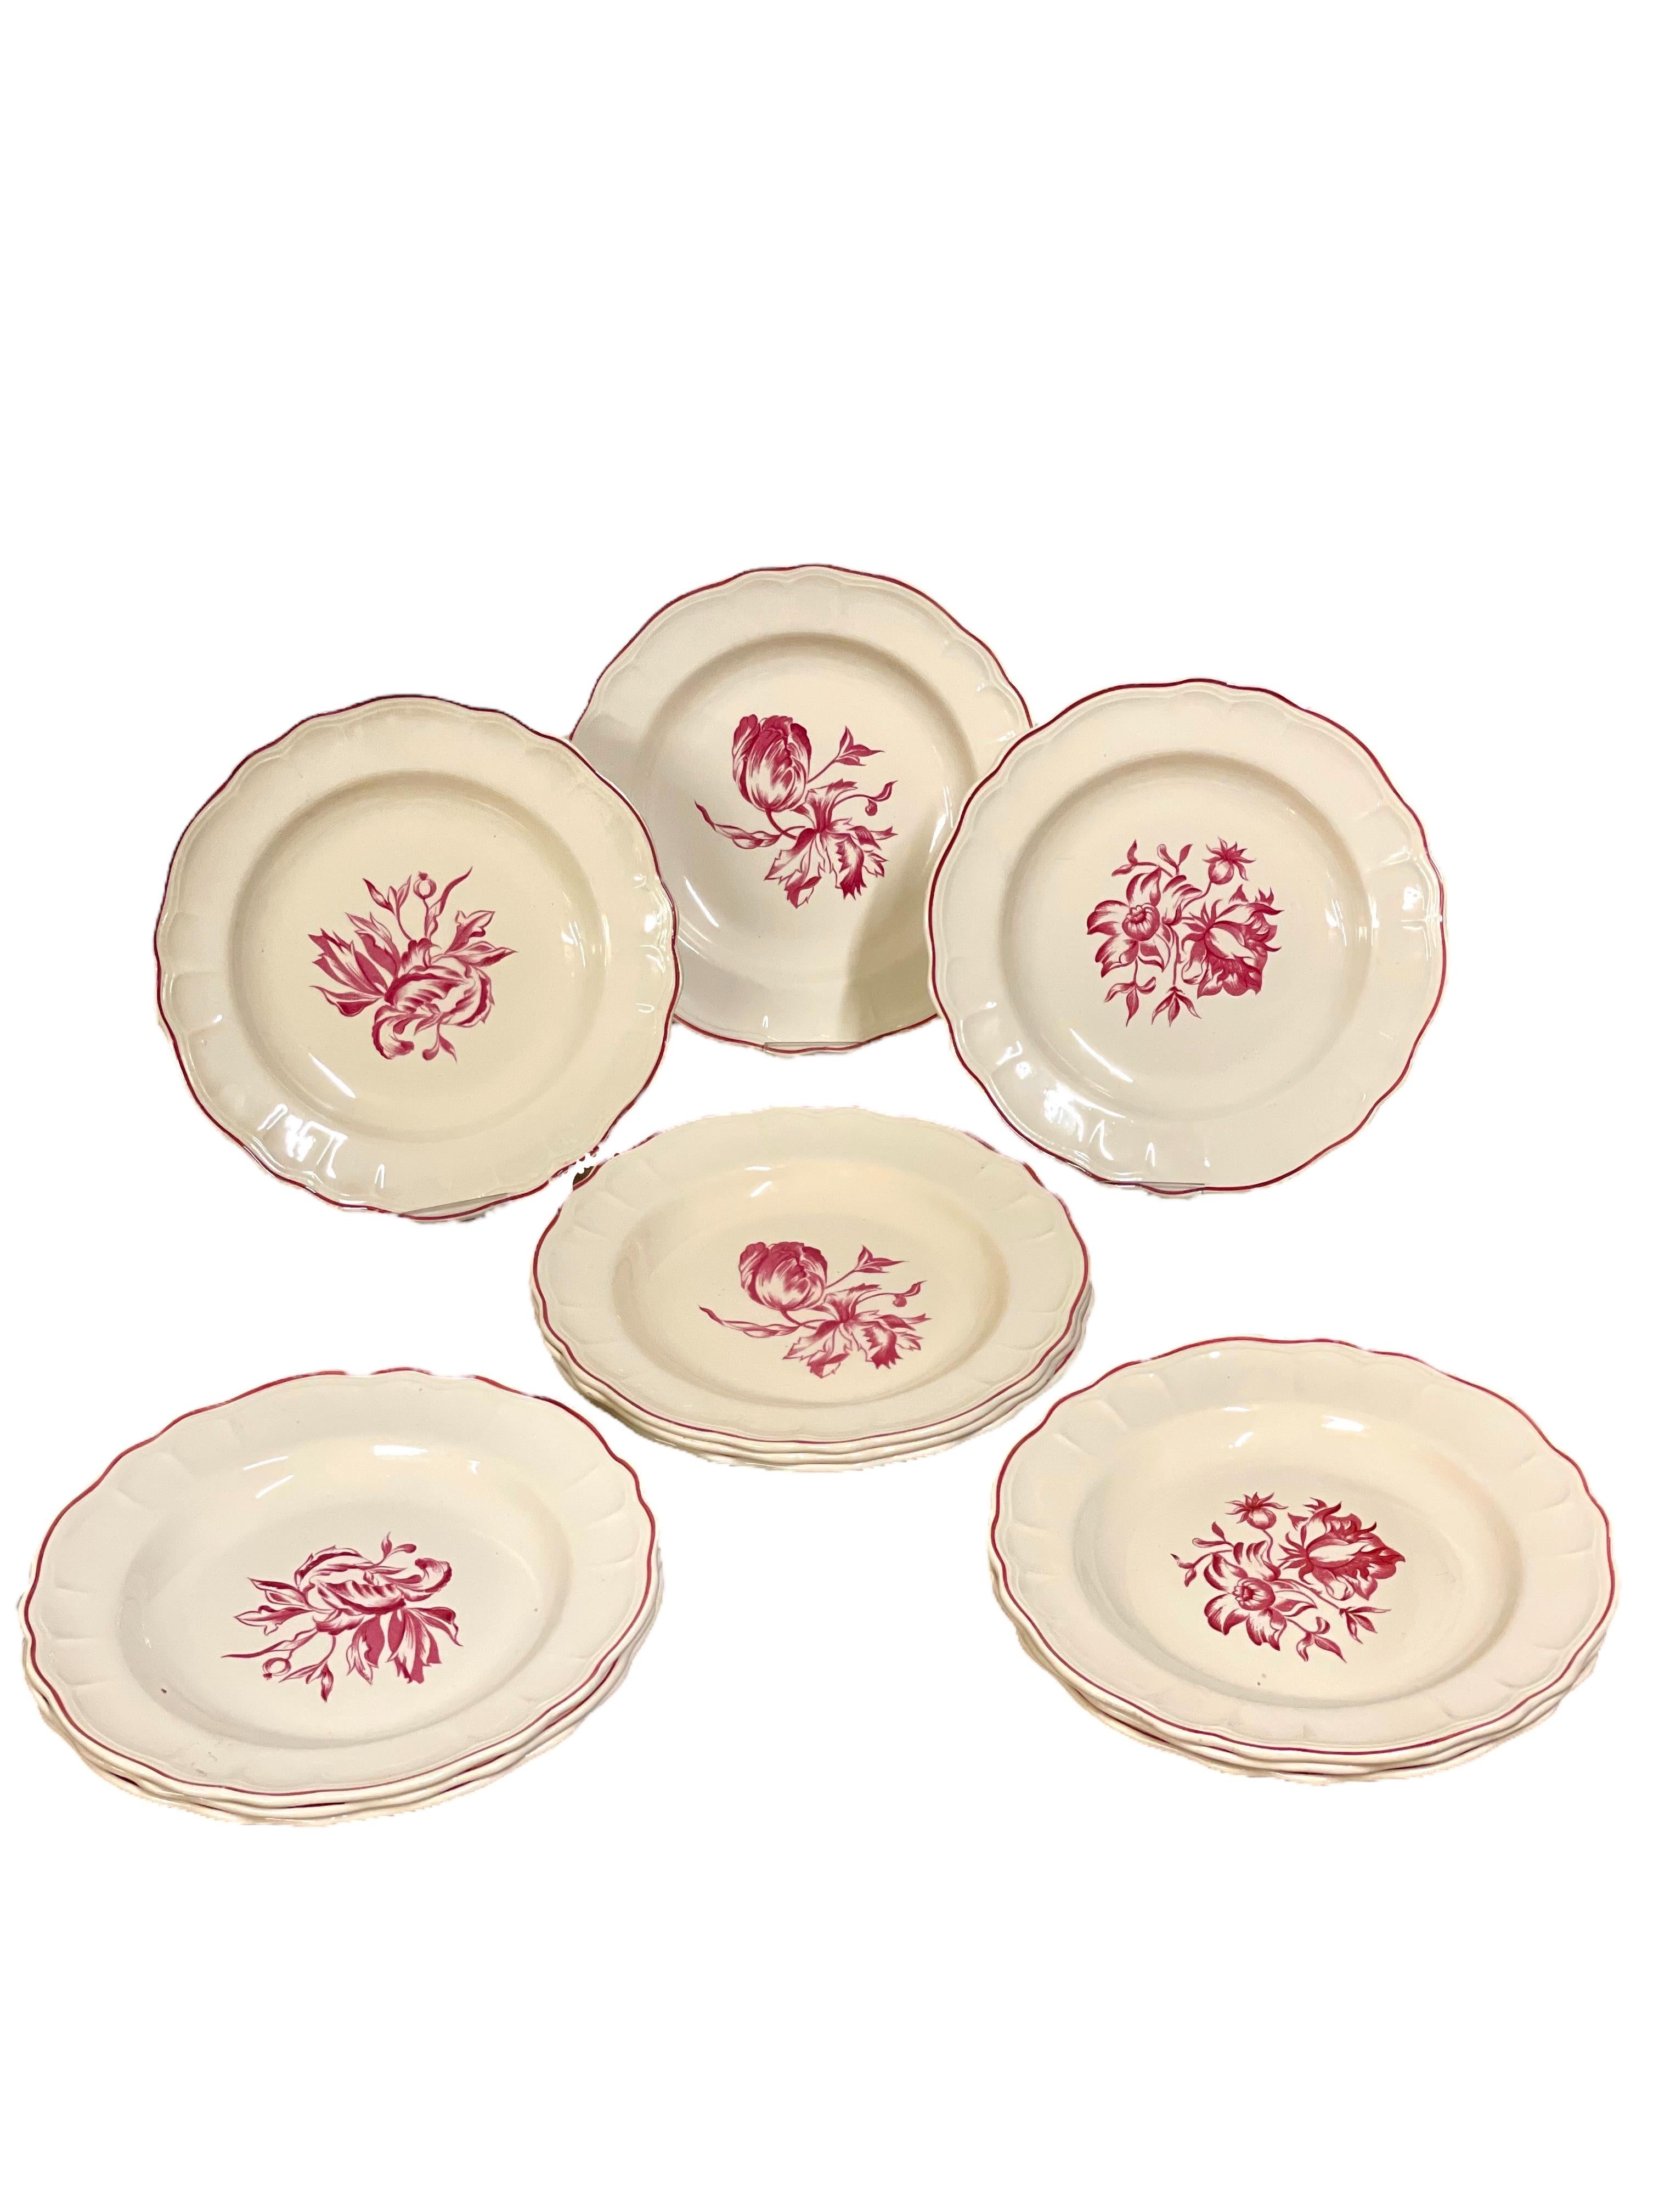 Beautiful dinner service in fine creamware, decorated with a red transferware print in three different floral designs. Each piece in the set has a delicately scalloped rim, highlighted with a hand-painted red border. The set comprises 12 dinner